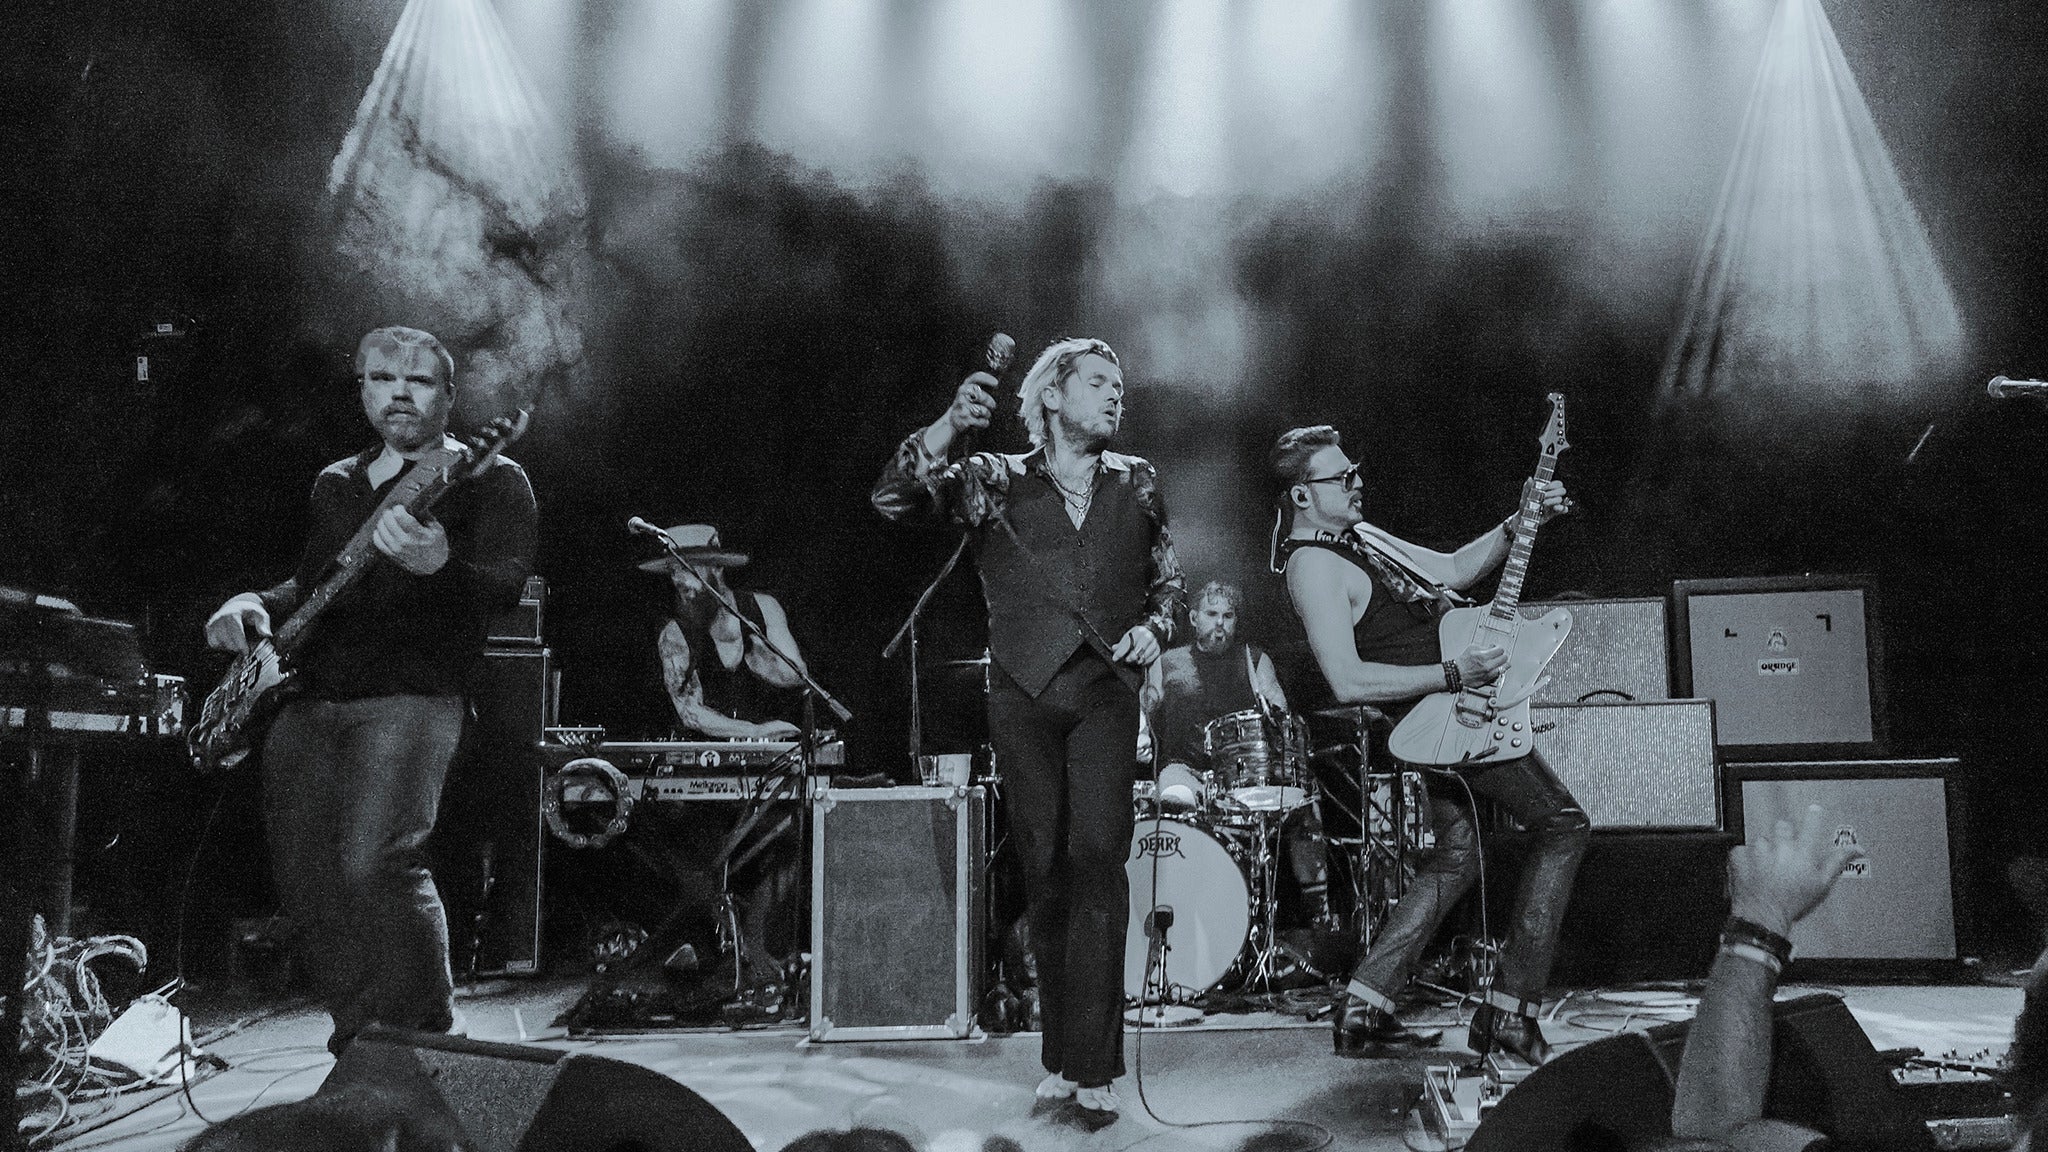 Rival Sons with Dorothy in Detroit promo photo for Citi® Cardmember Preferred presale offer code